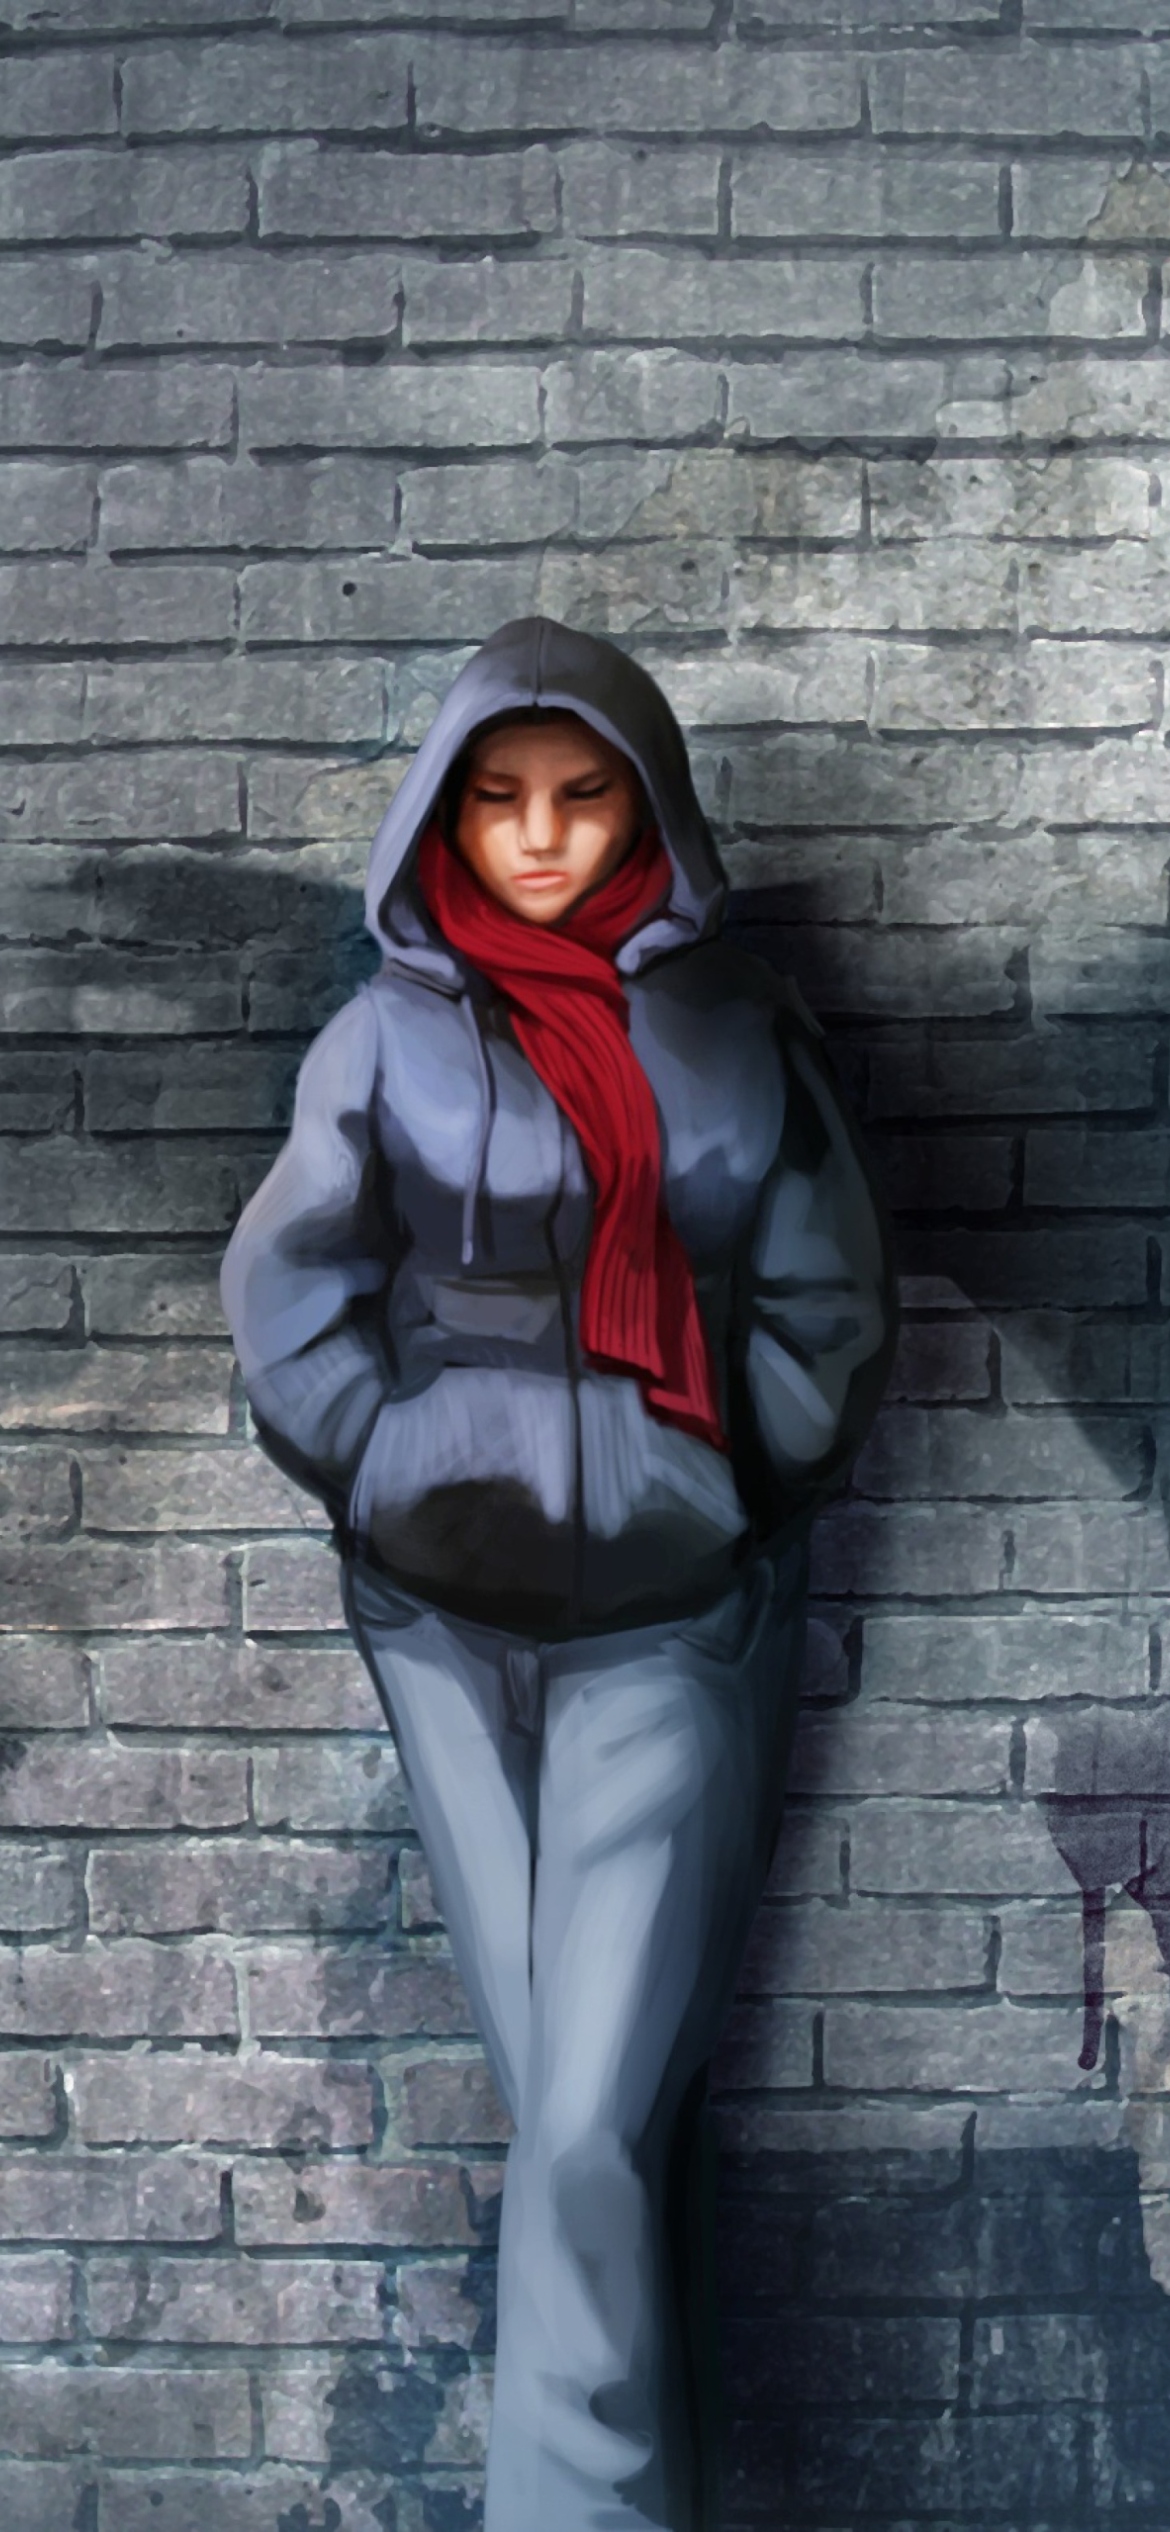 Red Scarf And Brick Wall wallpaper 1170x2532